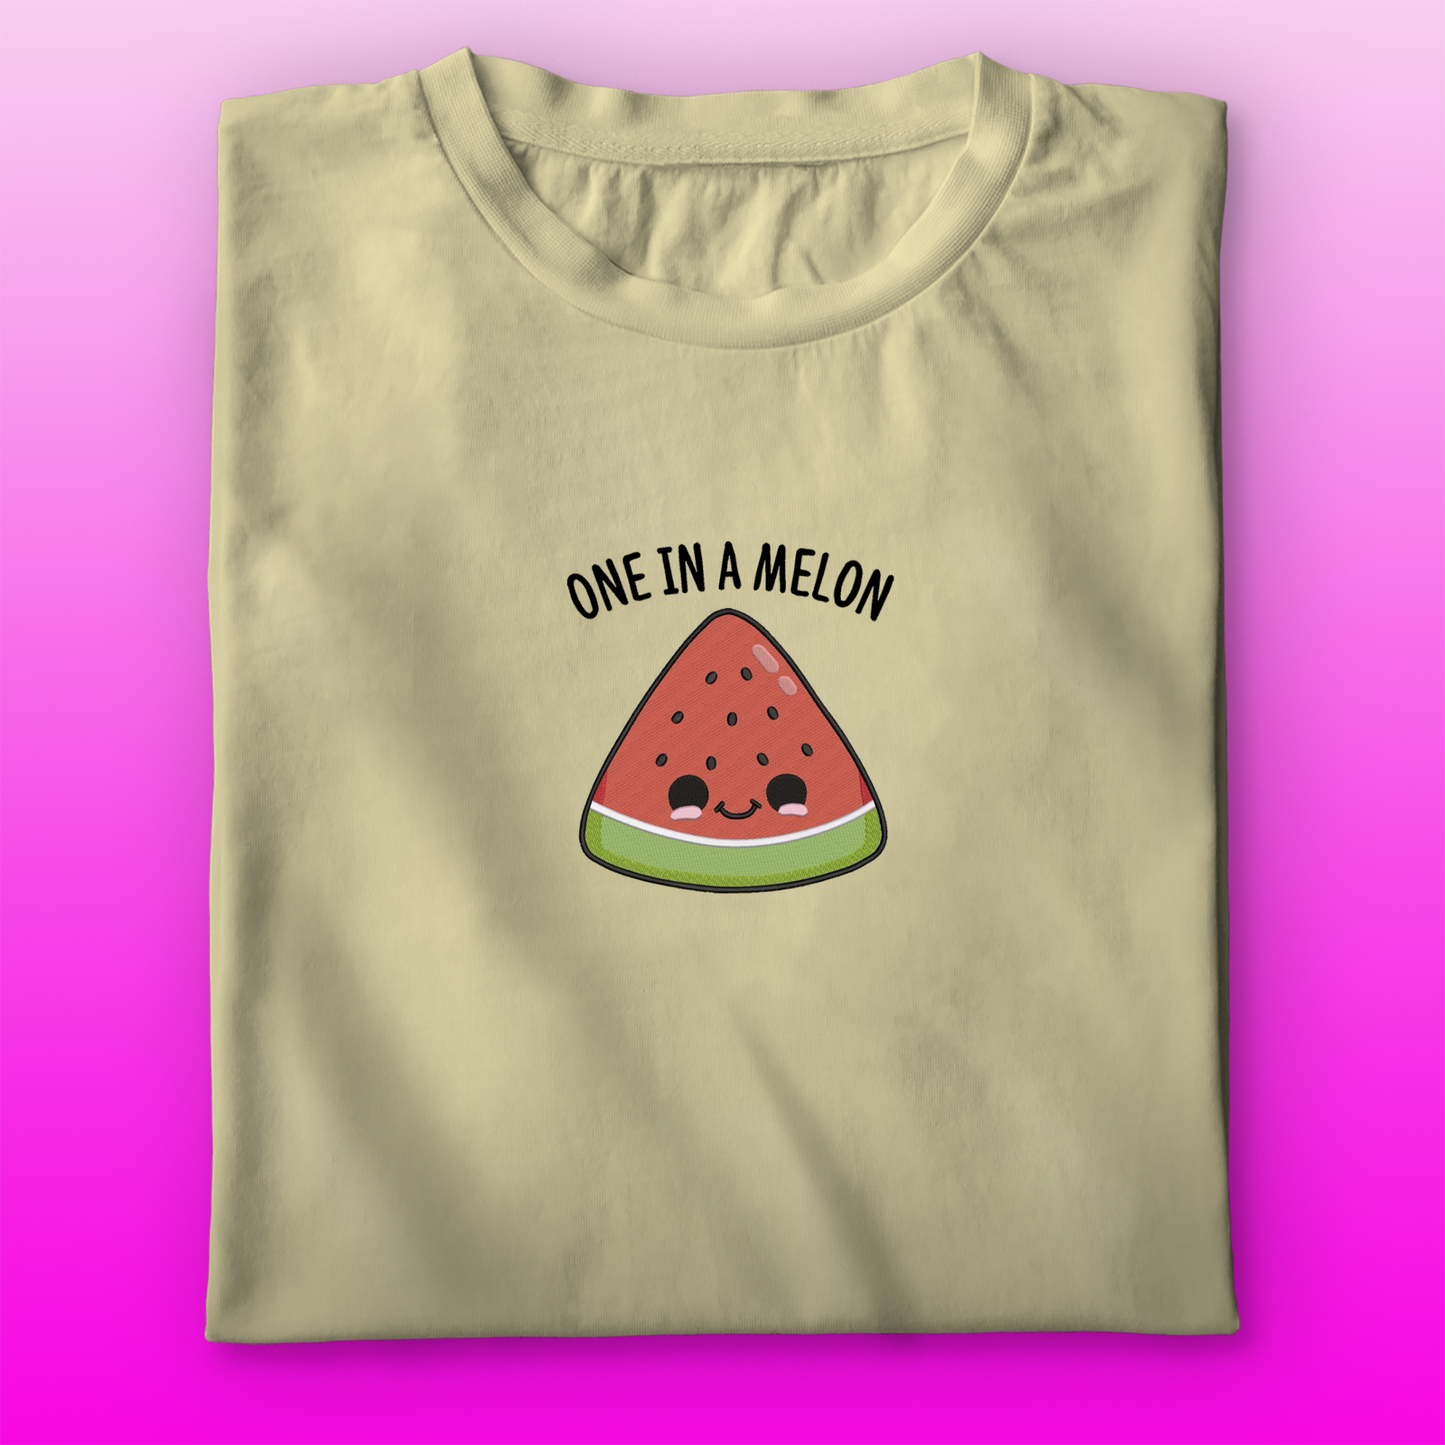 One In a Melon T-shirt